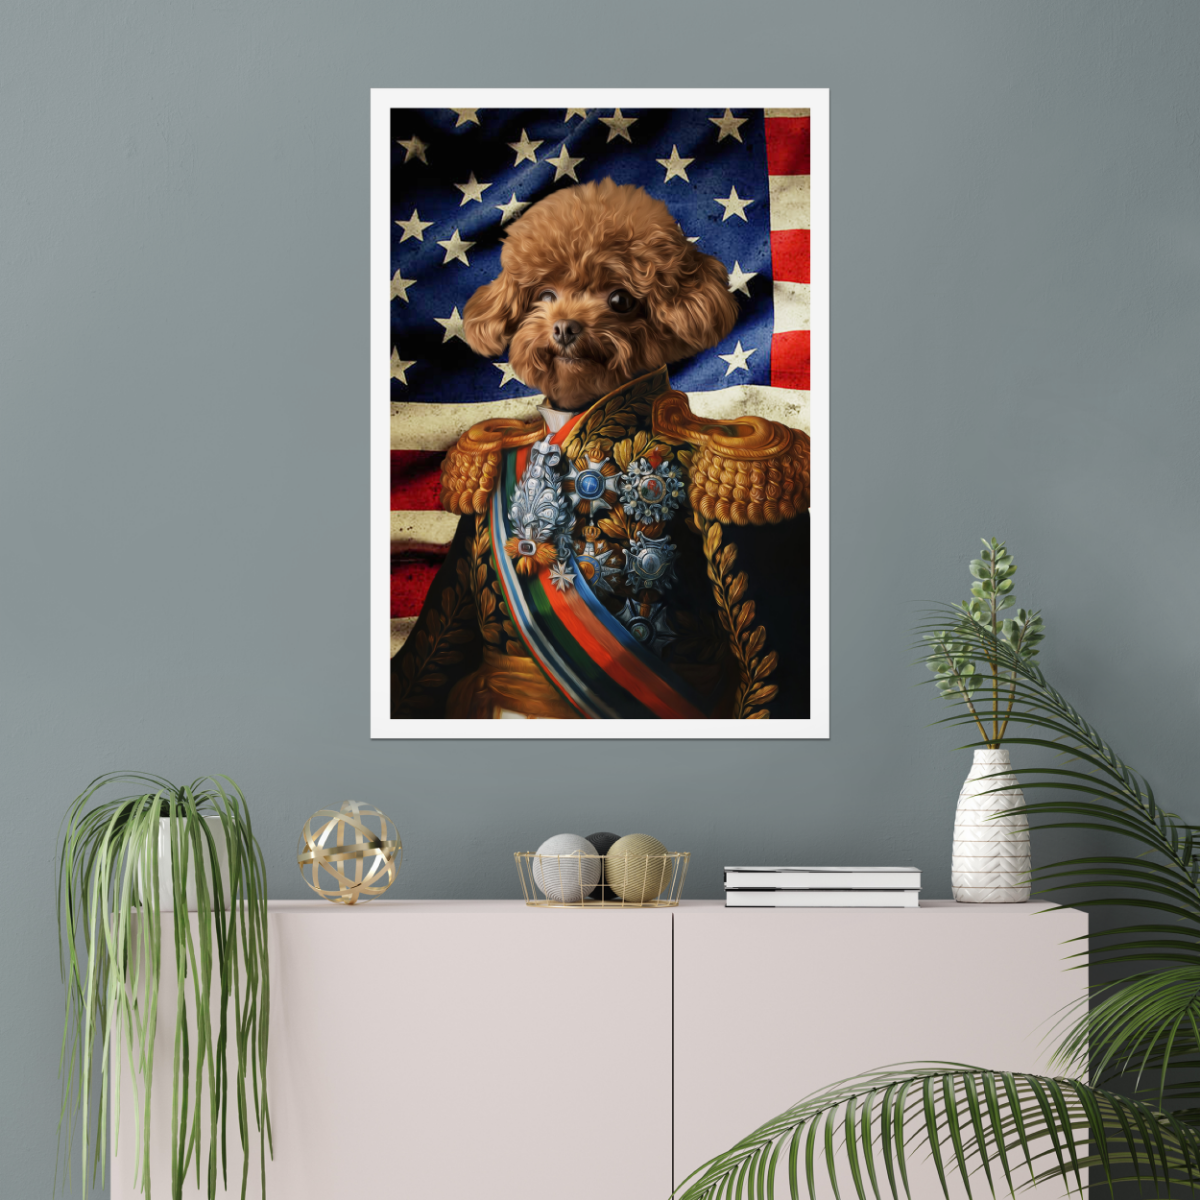 The First Lieutenant USA Flag Edition: Custom Pet Poster - Paw & Glory - #pet portraits# - #dog portraits# - #pet portraits uk#Paw & Glory, paw and glory, dog picture royalty funny pet drawings pet into art cat painting general crown and paw photo dogs uniform pet portraits